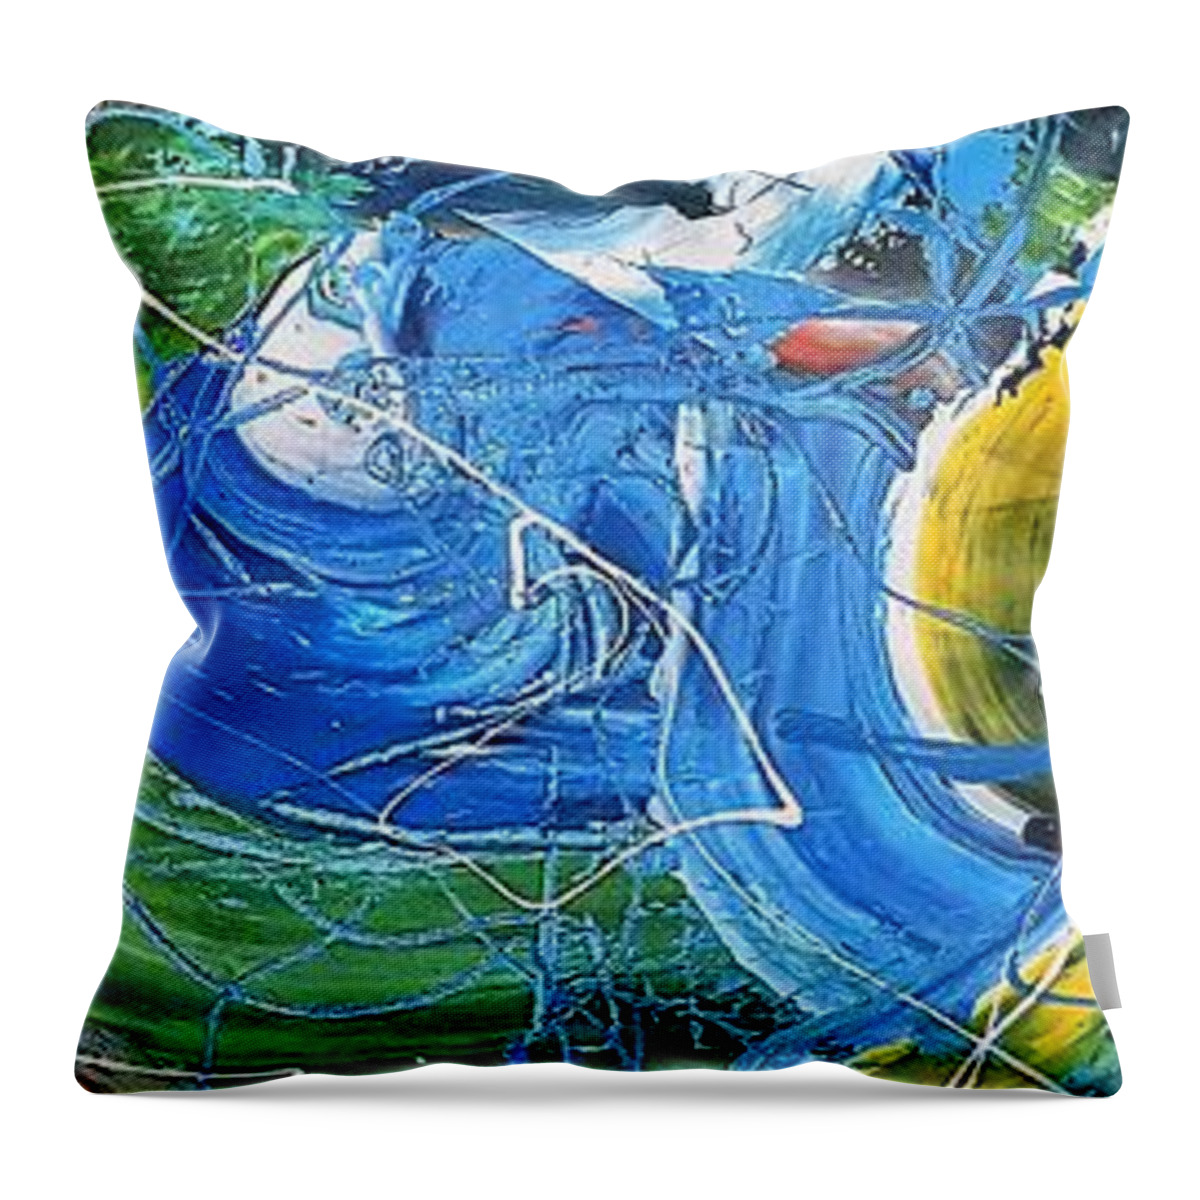  Throw Pillow featuring the painting Life by Martin Bush